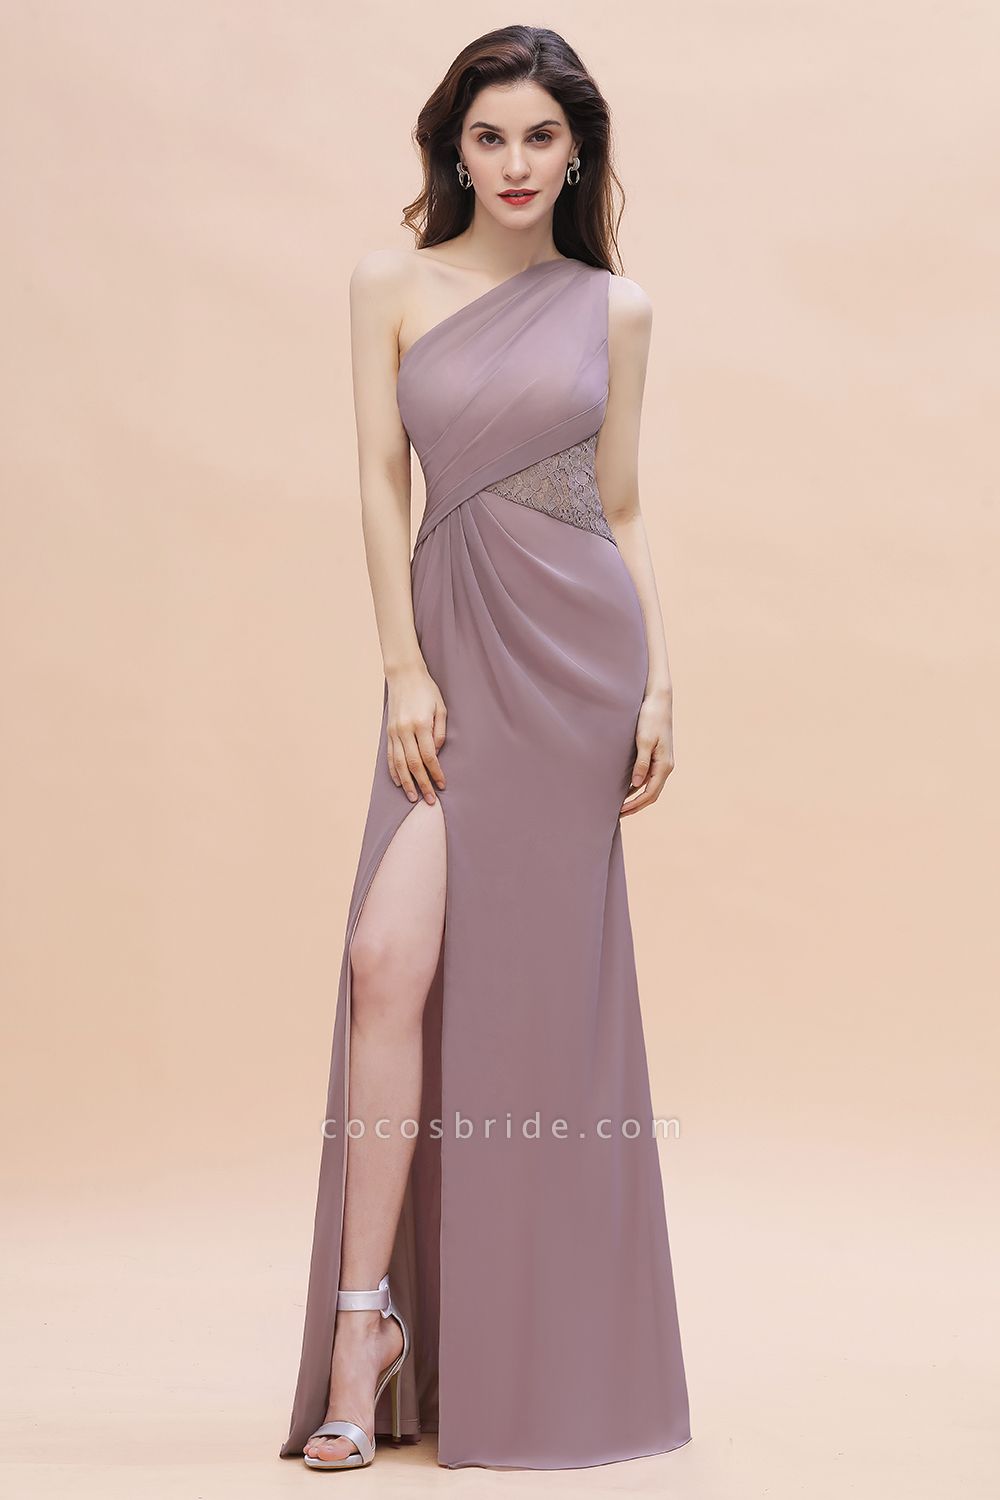 Charming One Shoulder Chiffon Lace Mermaid Bridesmaid Dresses With Slit